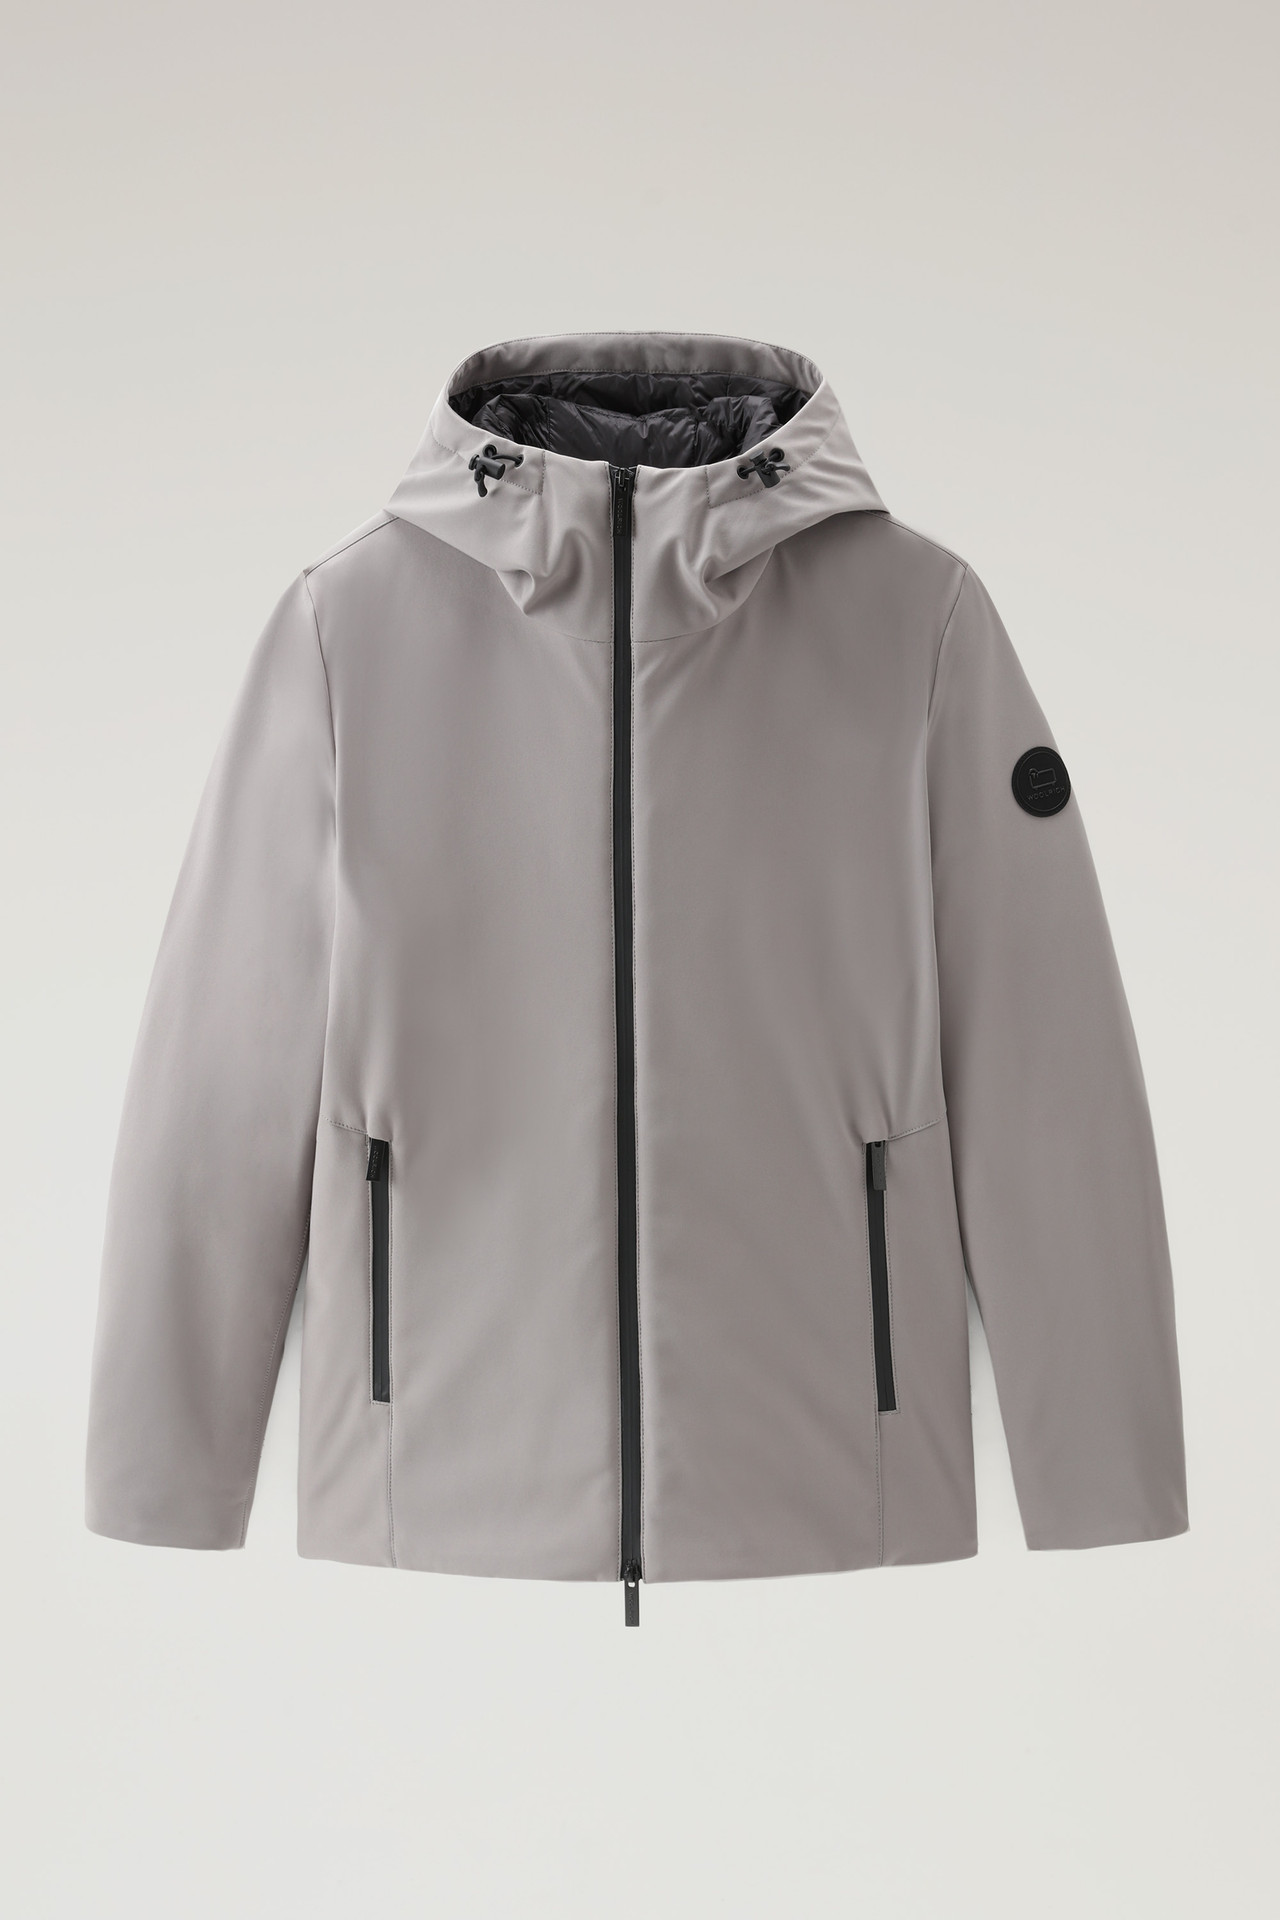 Woolrich – Pacific Softshell – Grijs